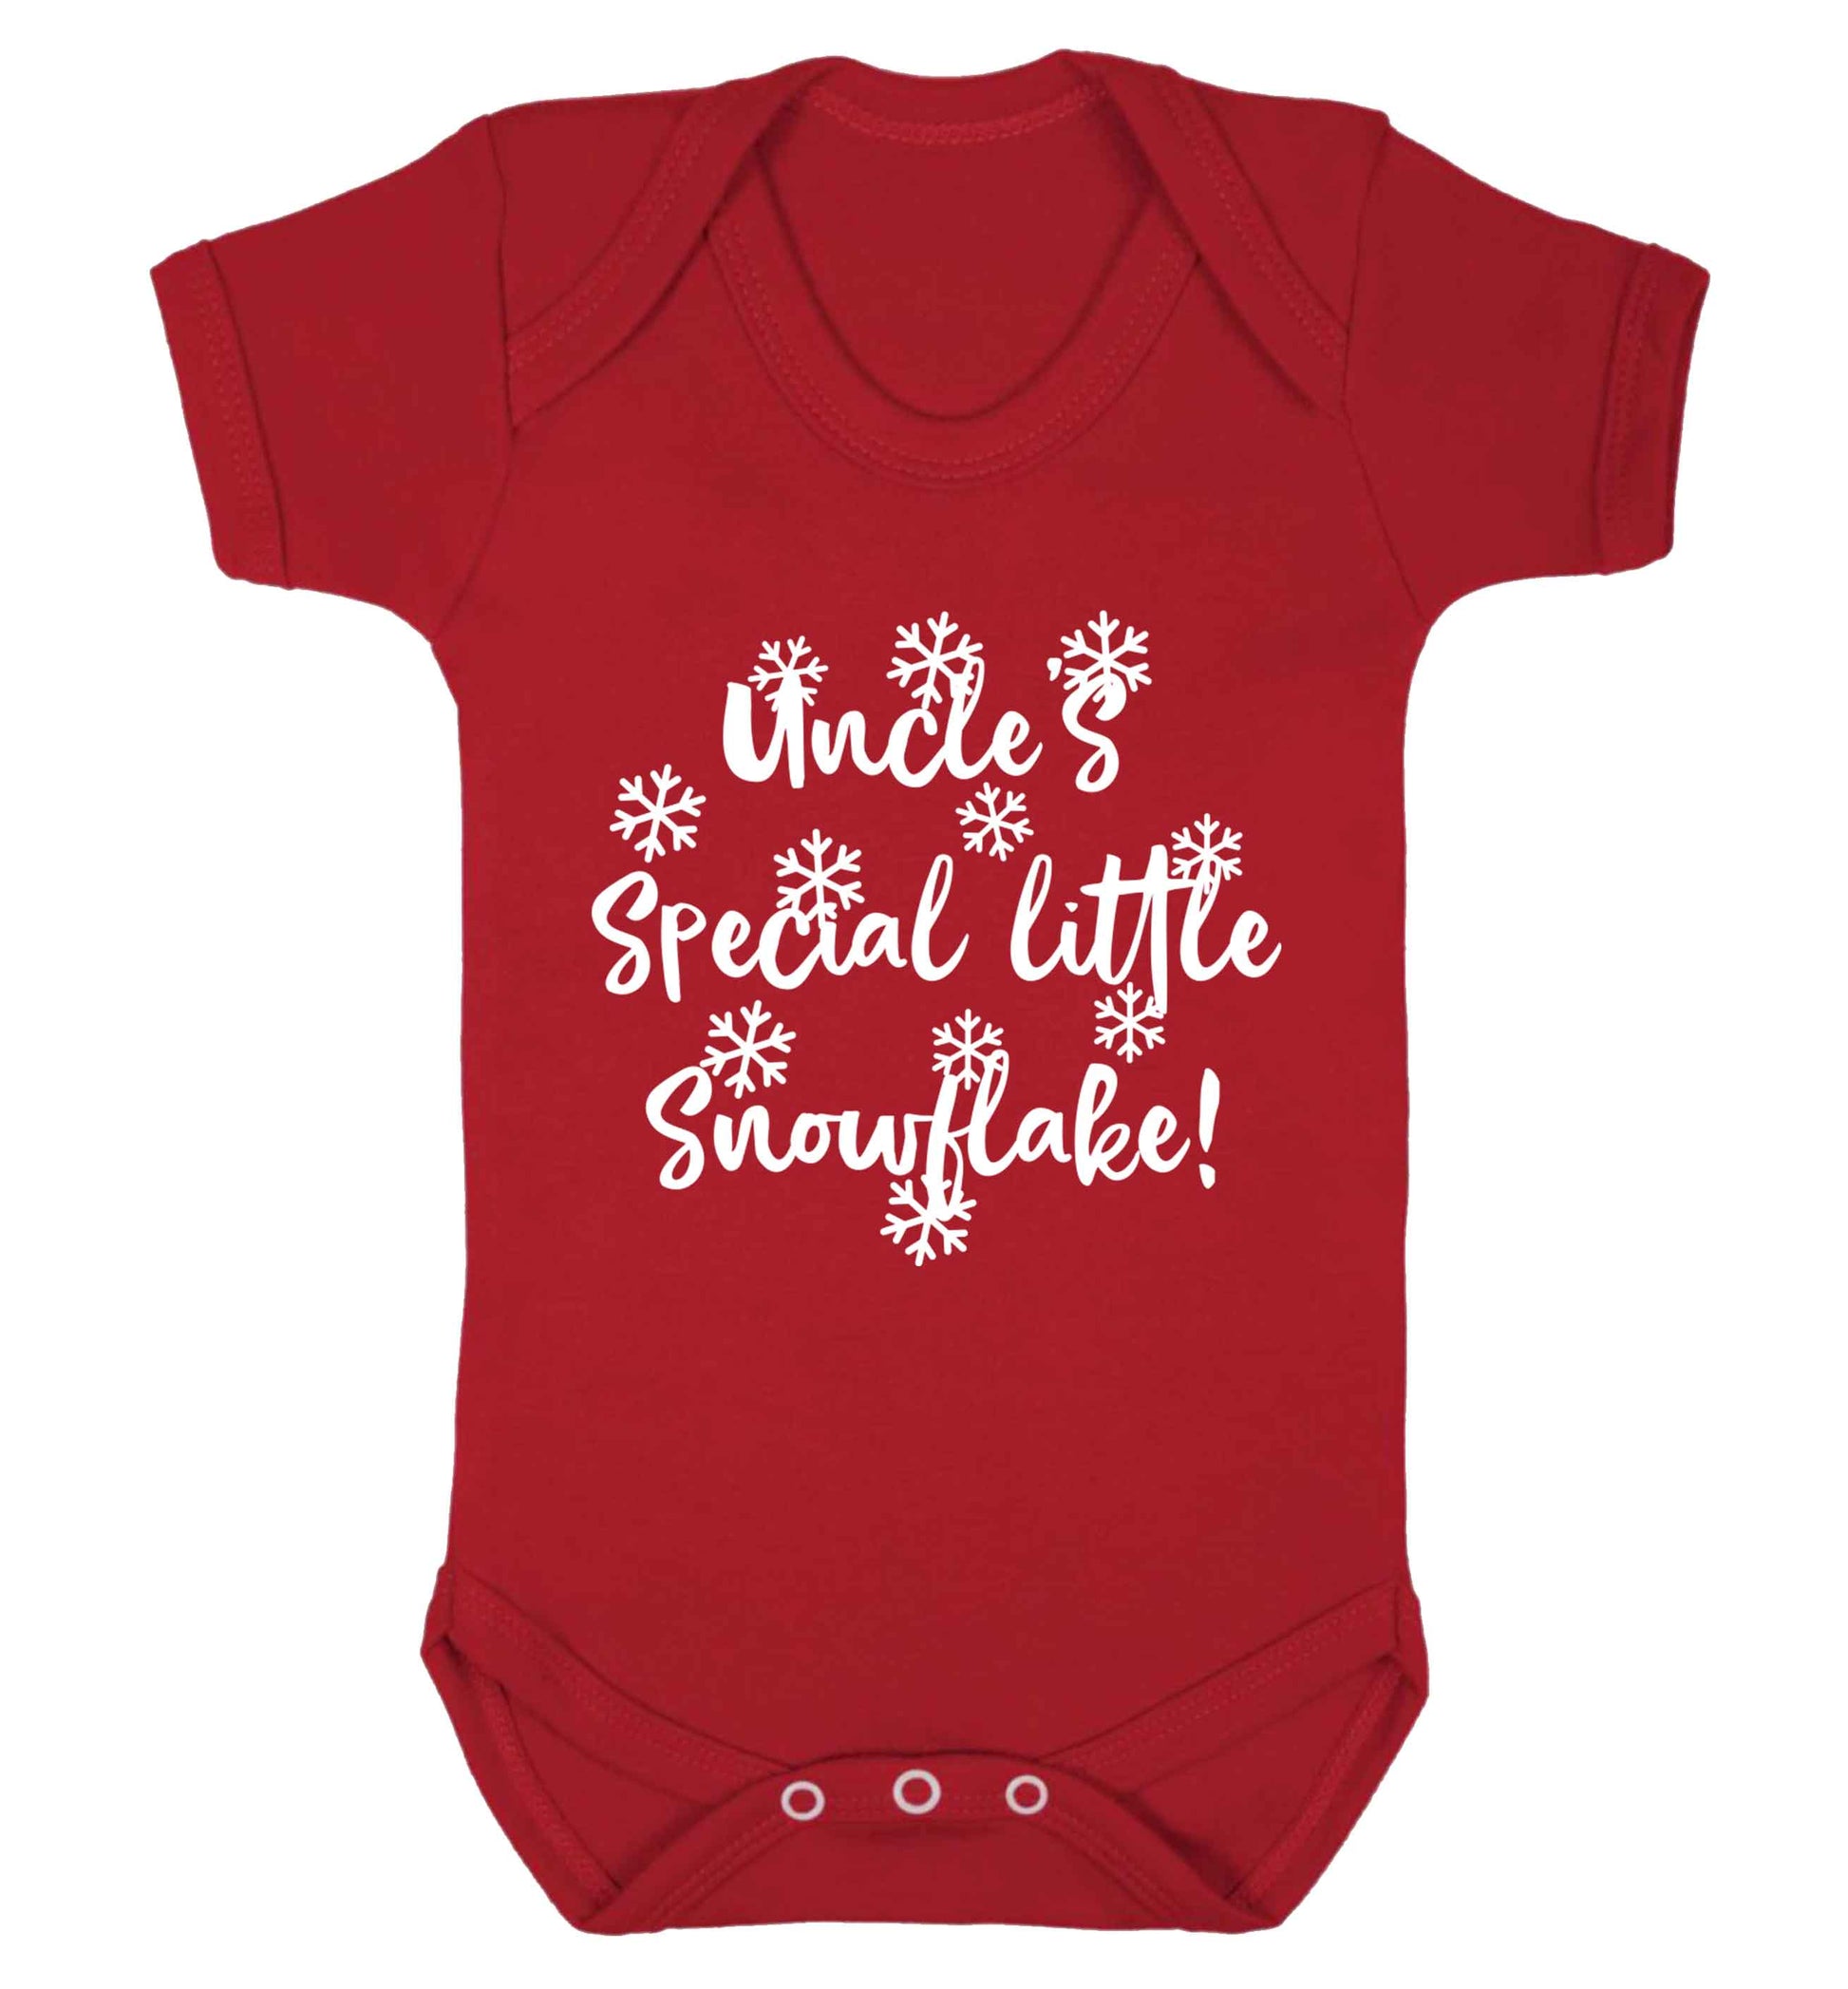 Uncle's special little snowflake Baby Vest red 18-24 months